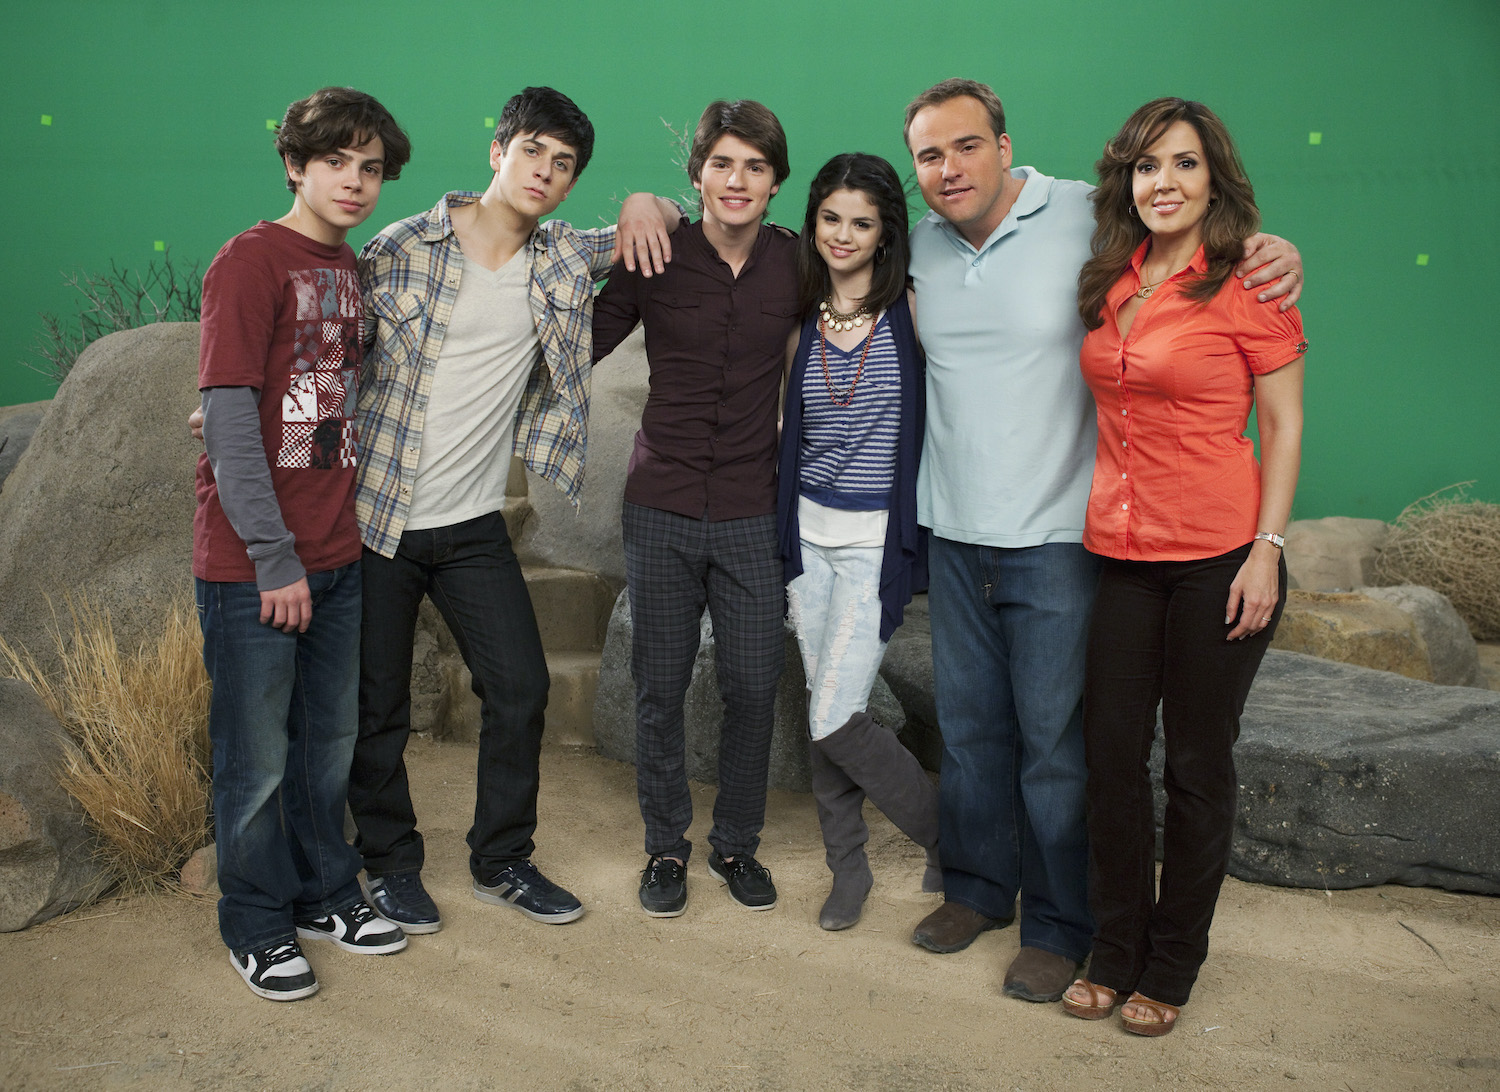 Cast of 'Wizards of Waverly Place'